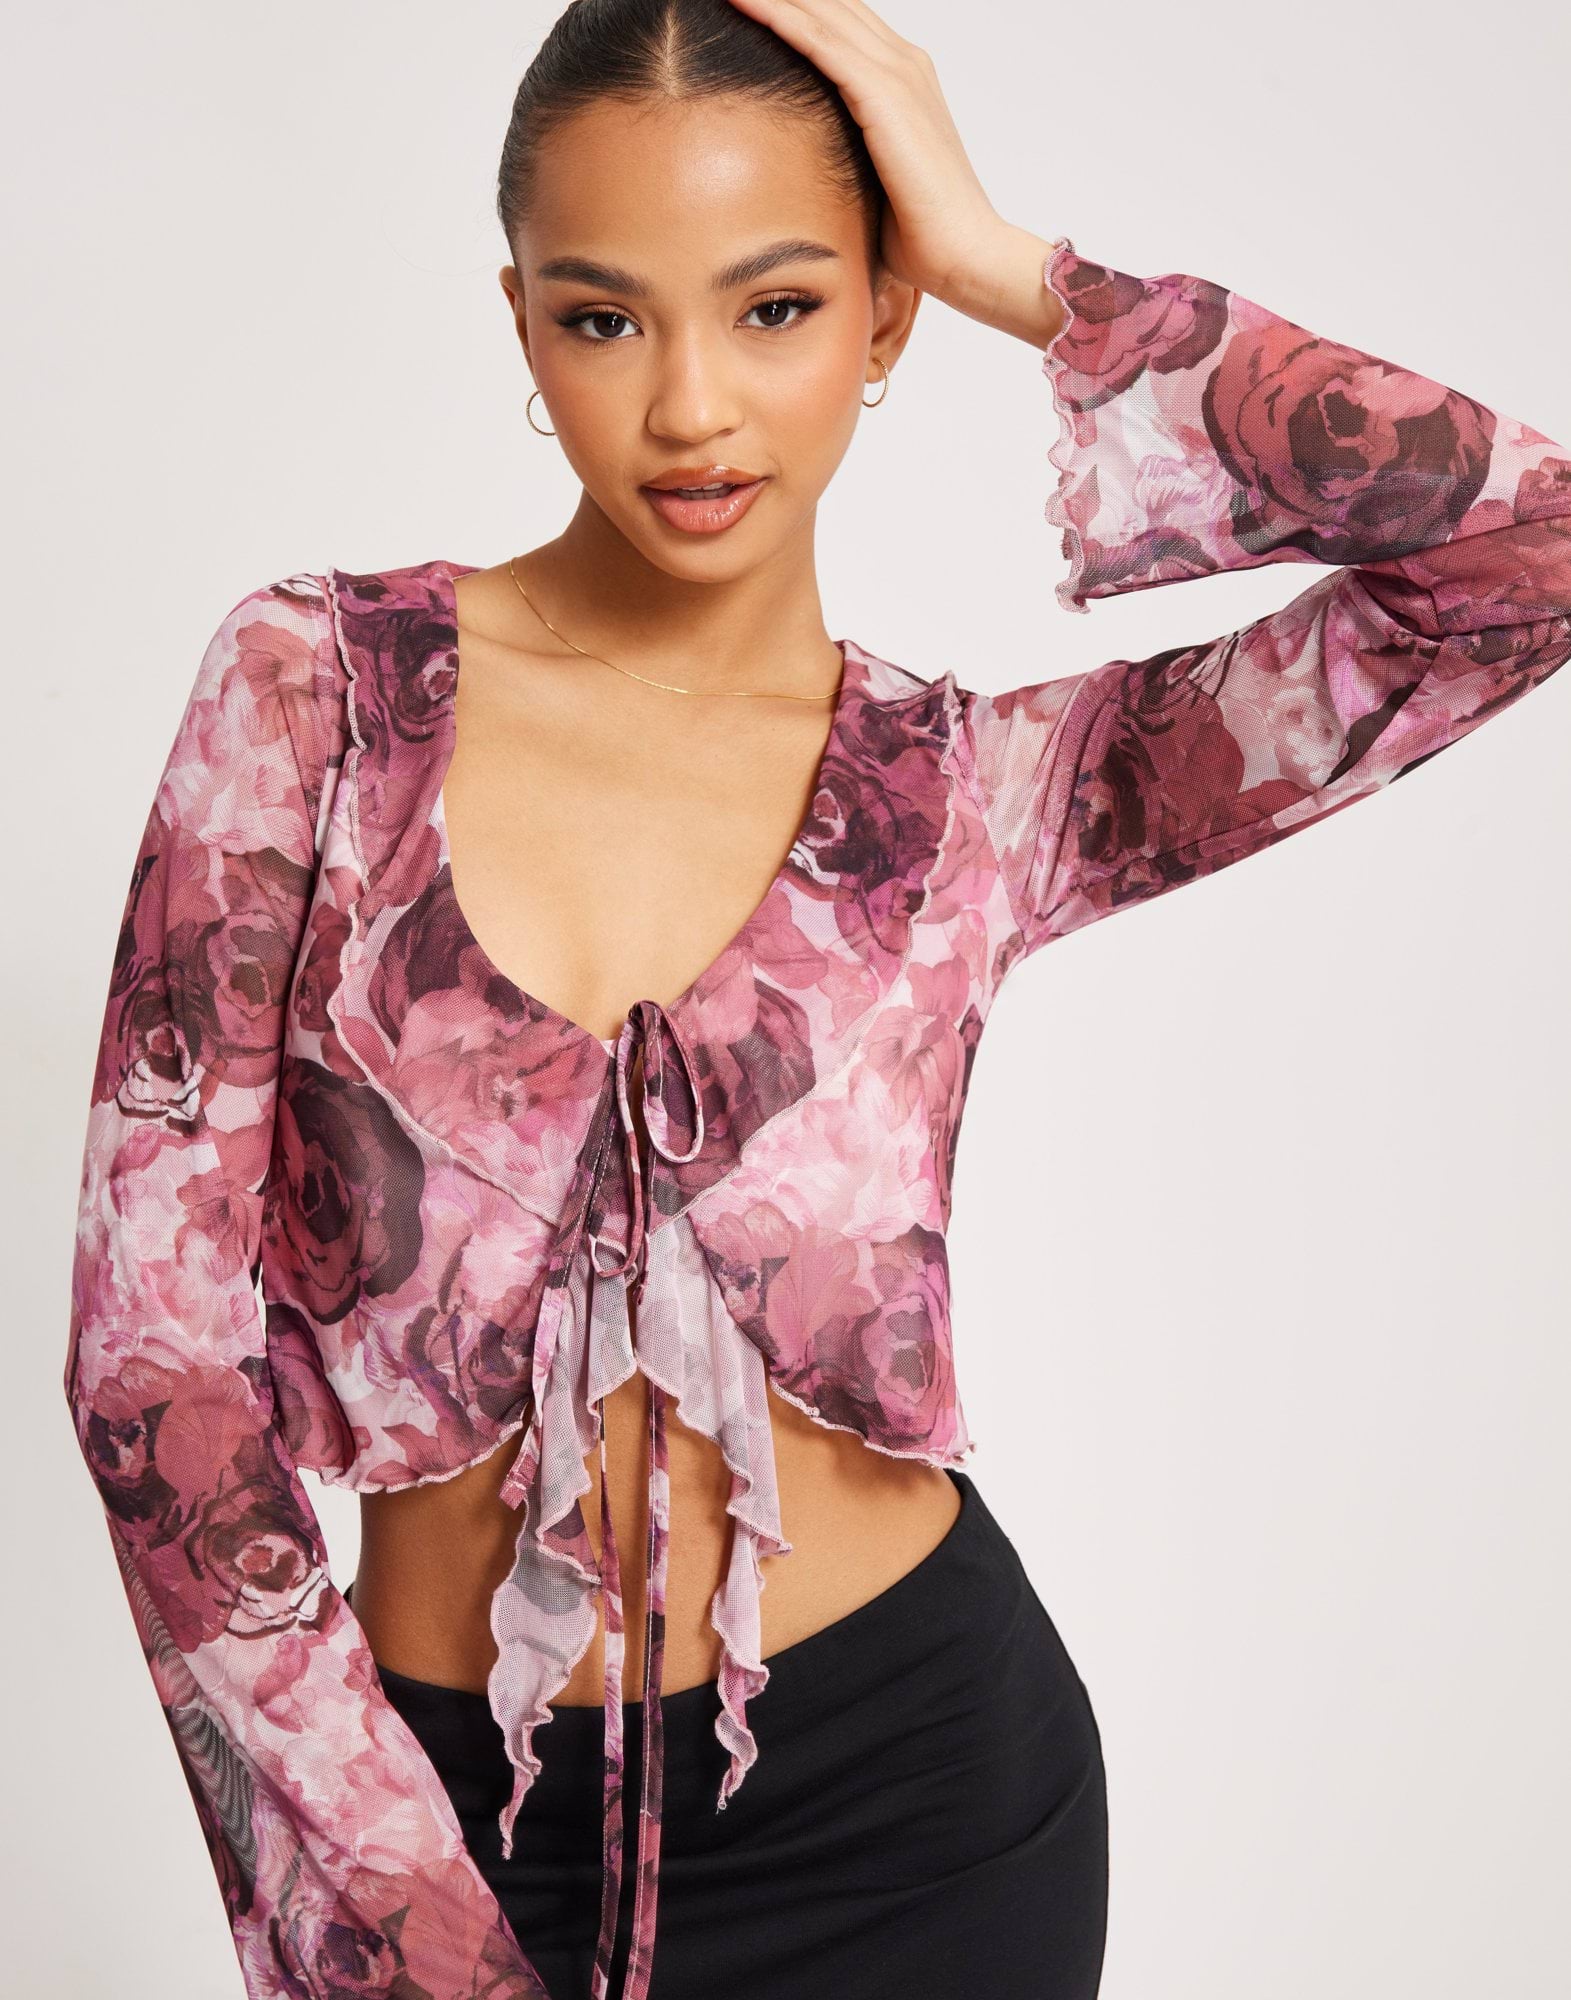 Lovely Mesh Printed Top